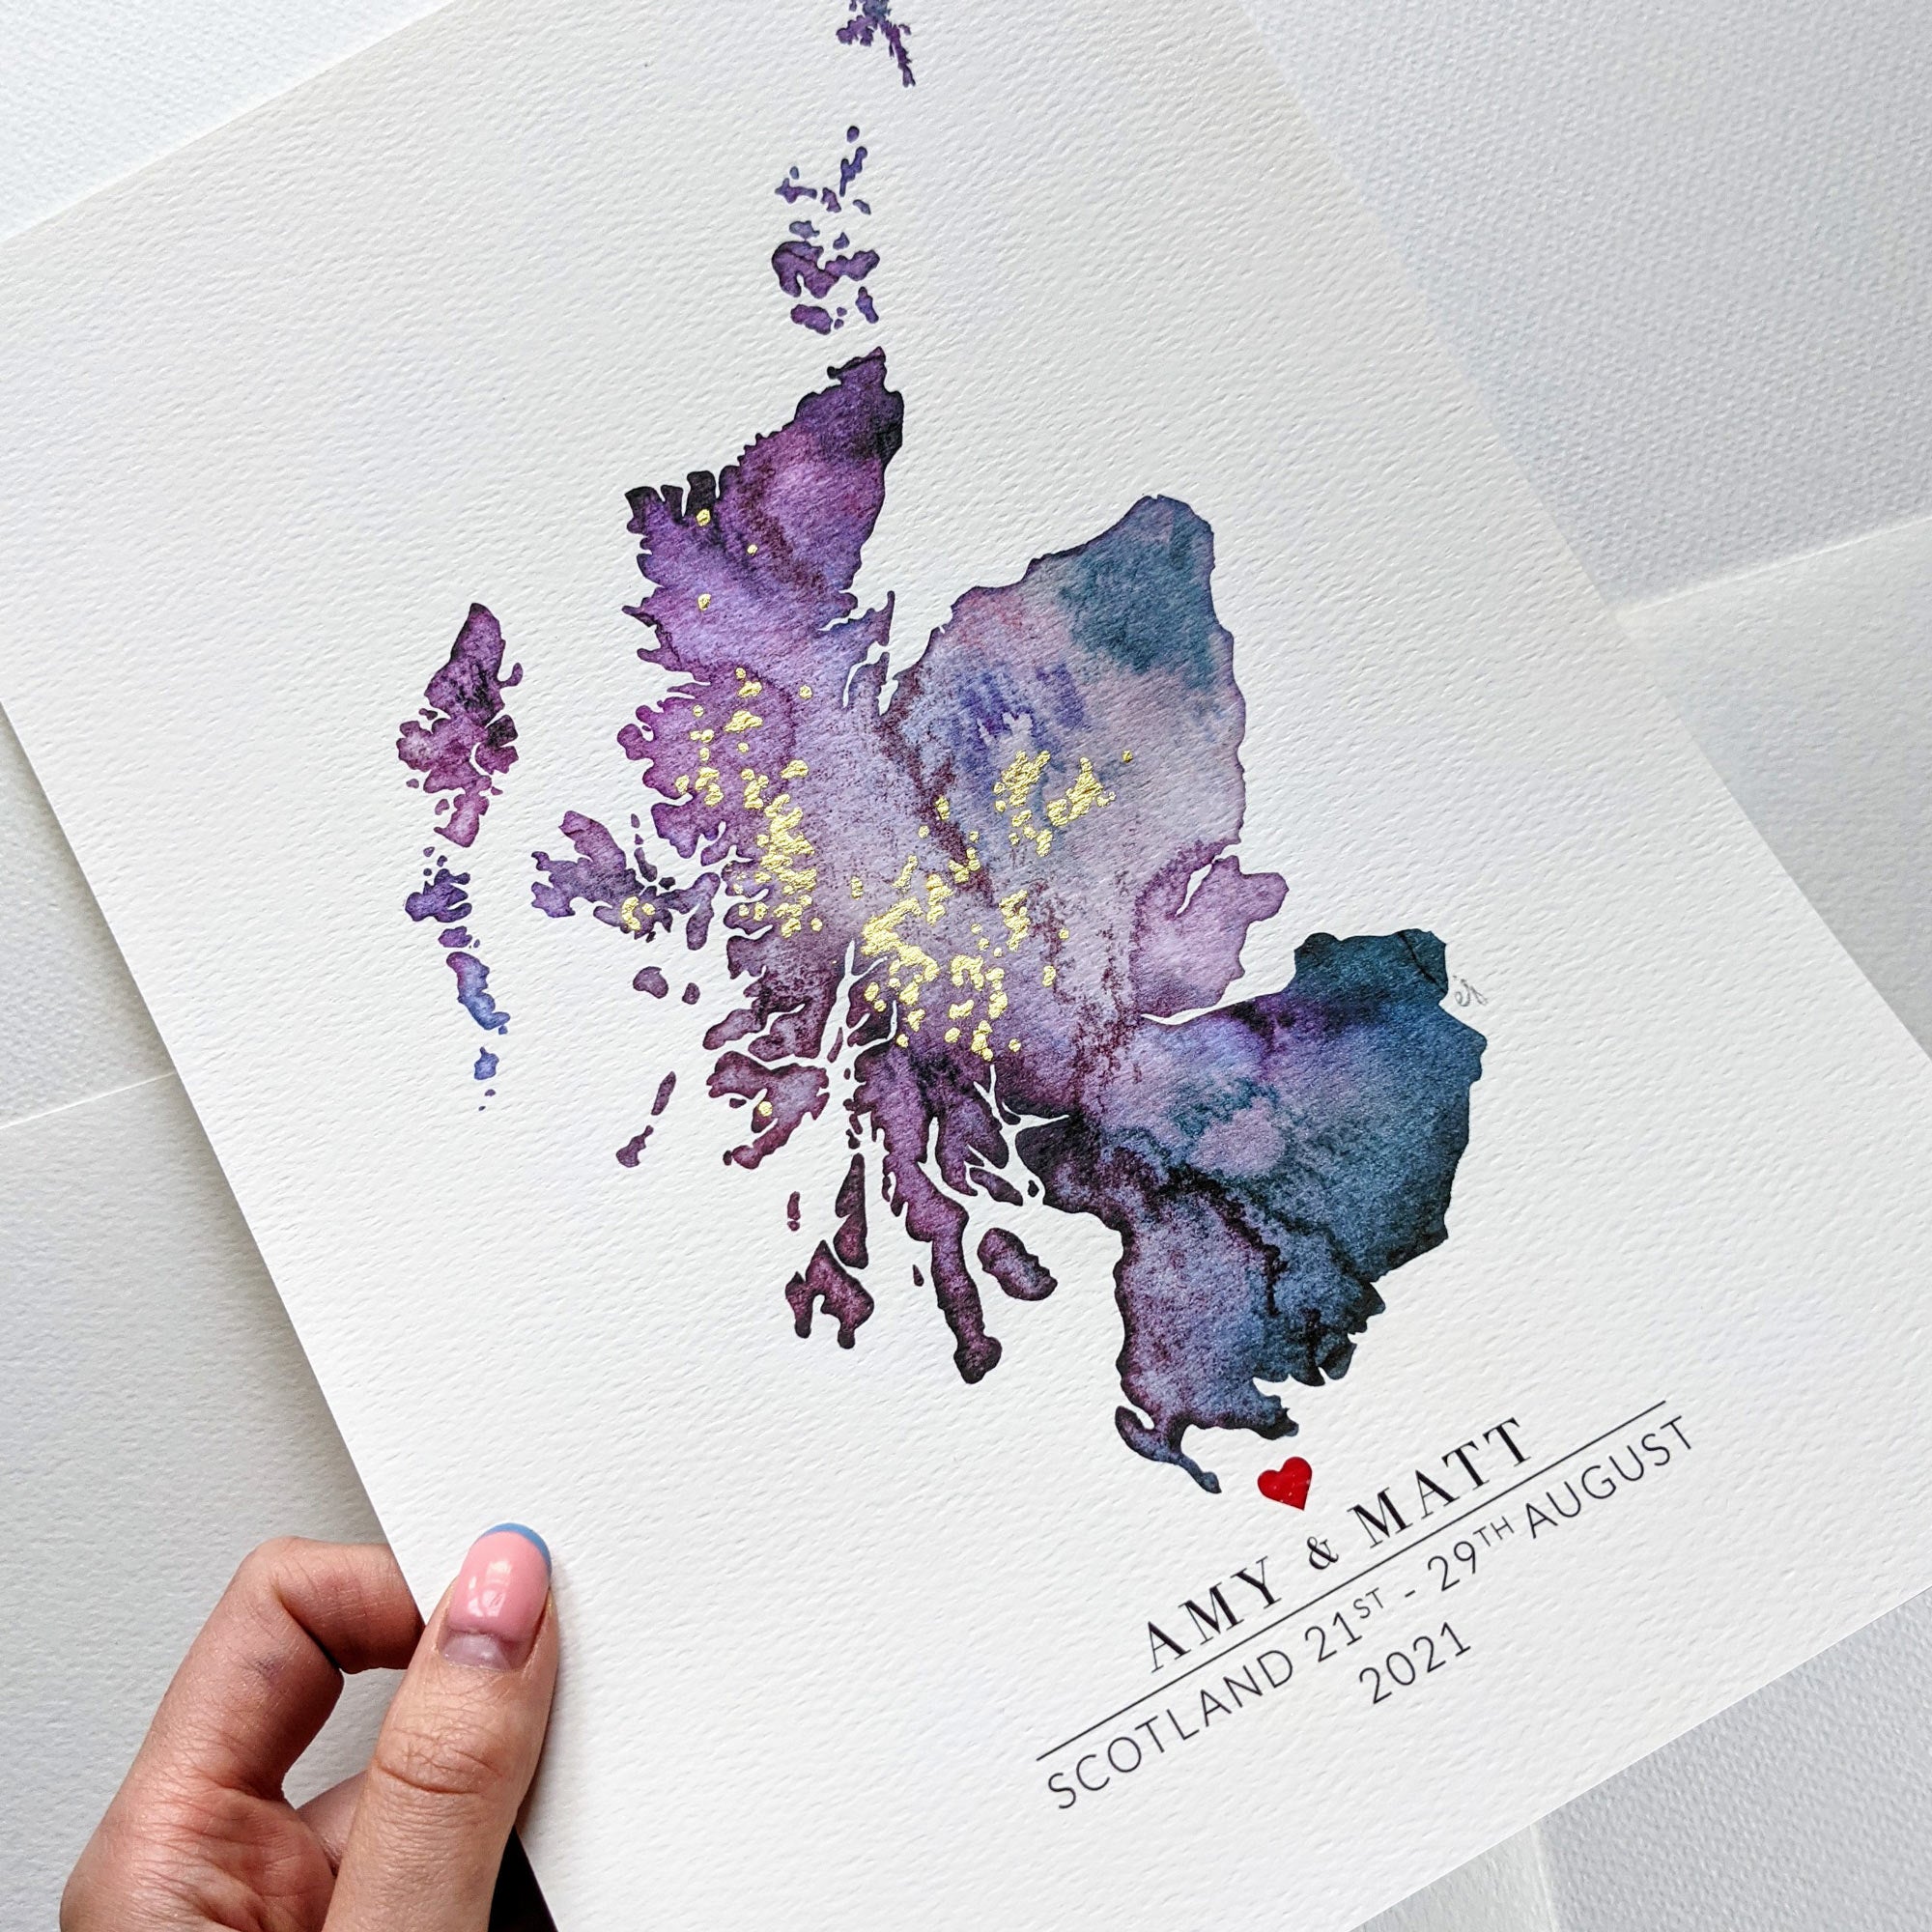 watercolour map of the Scotland's munro's in hand painted gold by Scottish artist Eilidh Jamieson